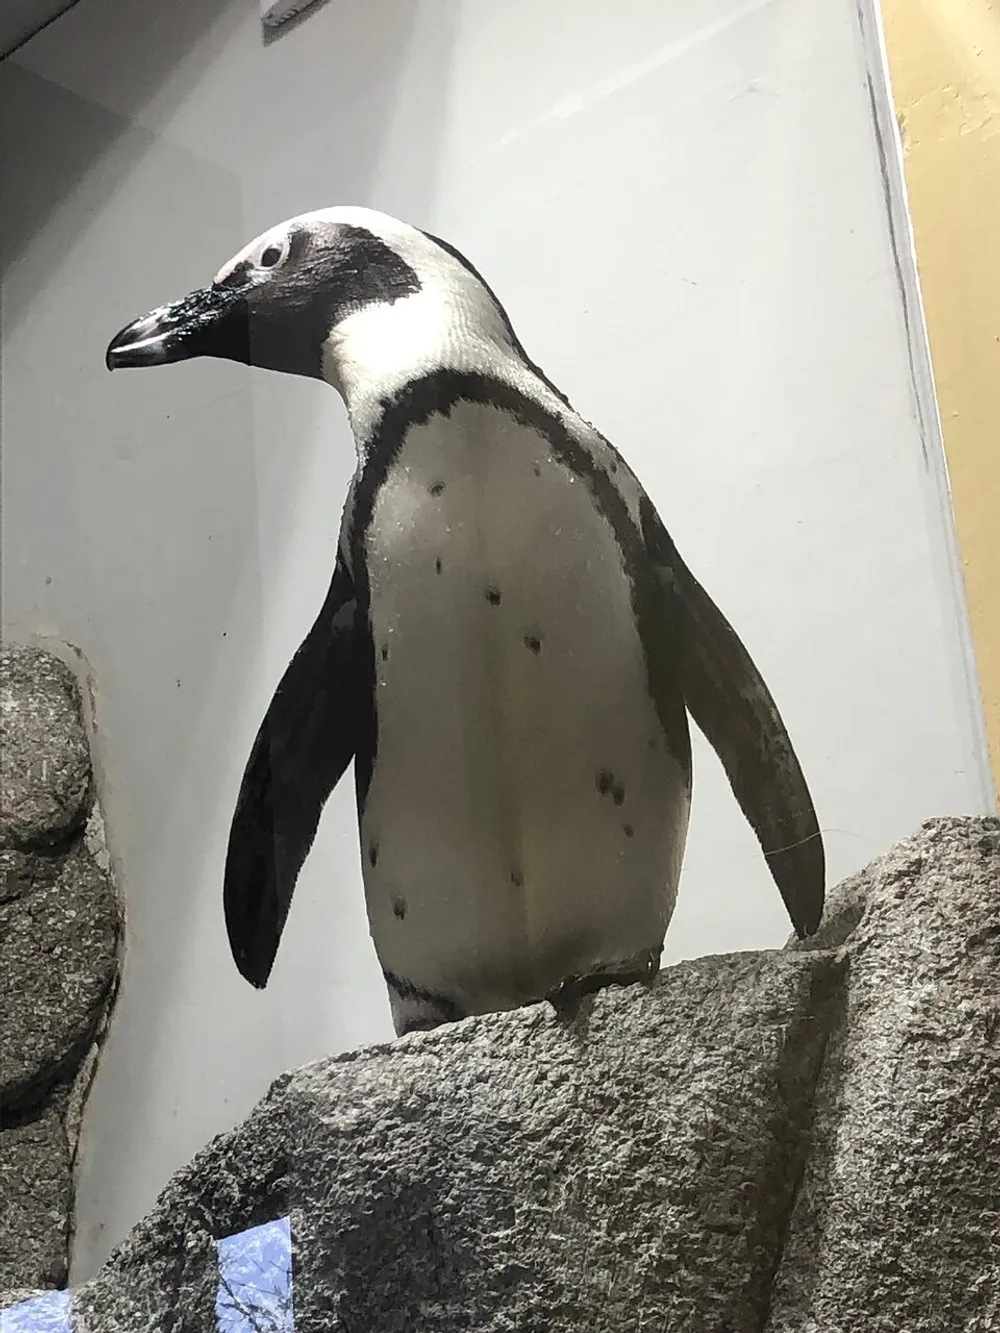 The image shows a penguin model perched on artificial rocks with a white and beige background